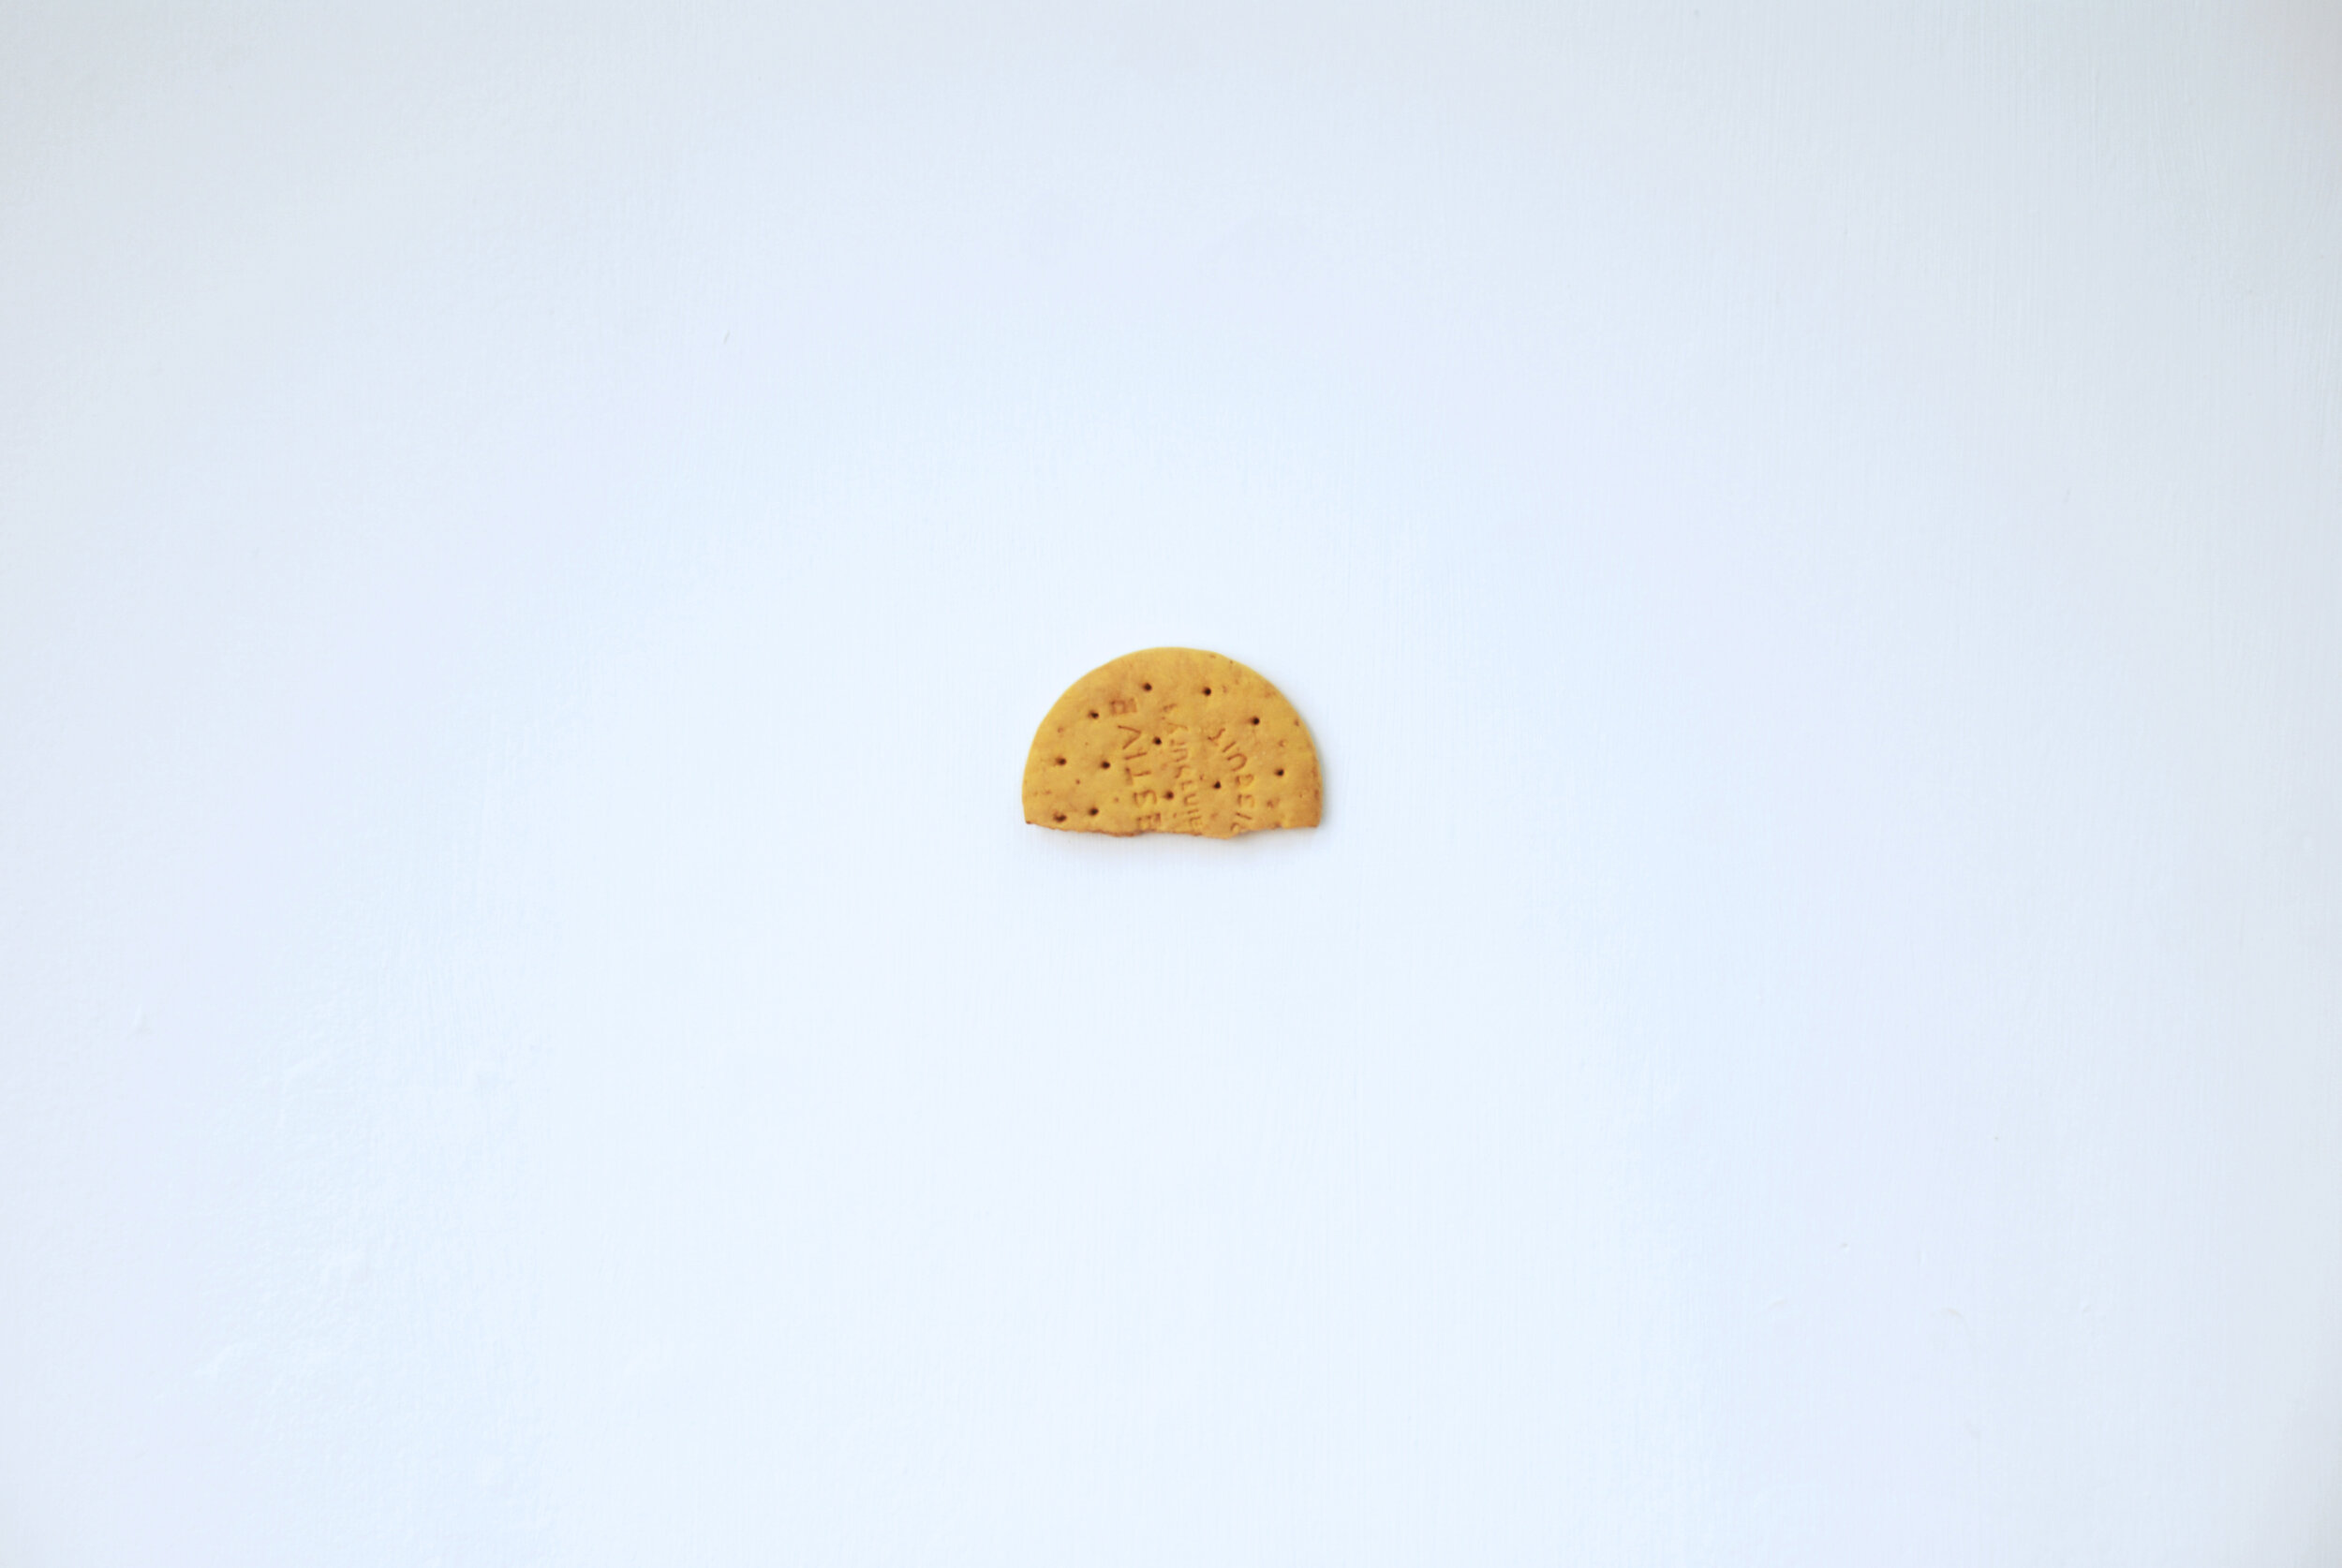  Apollo 11 image of Earthrise 1969 2020 Cast Plaster of broken Digestive biscuit, Oil Paint 